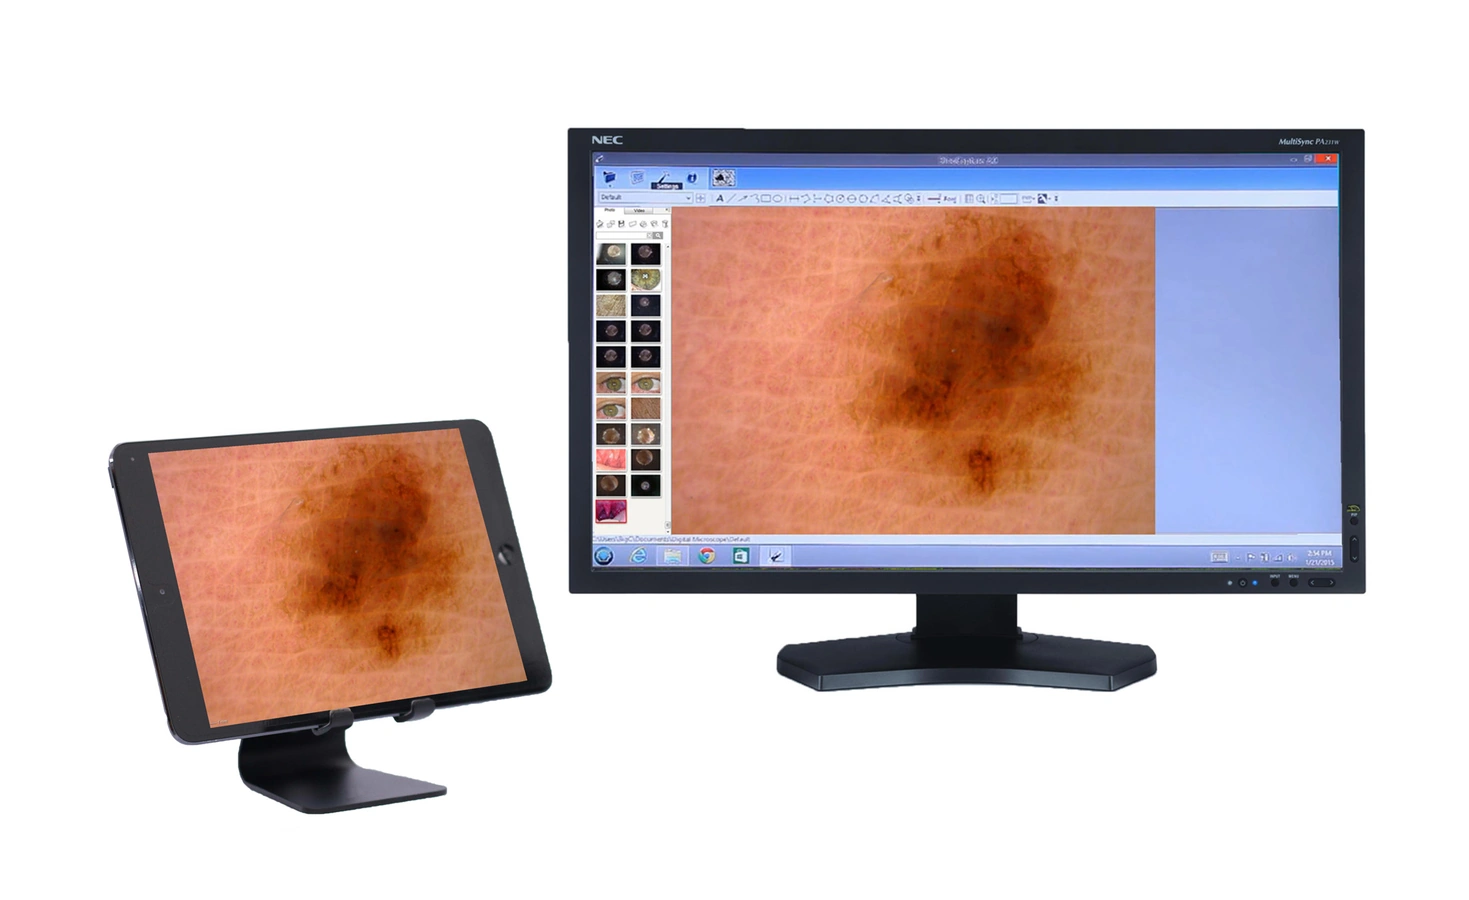 Dermascope results live view in free software or app